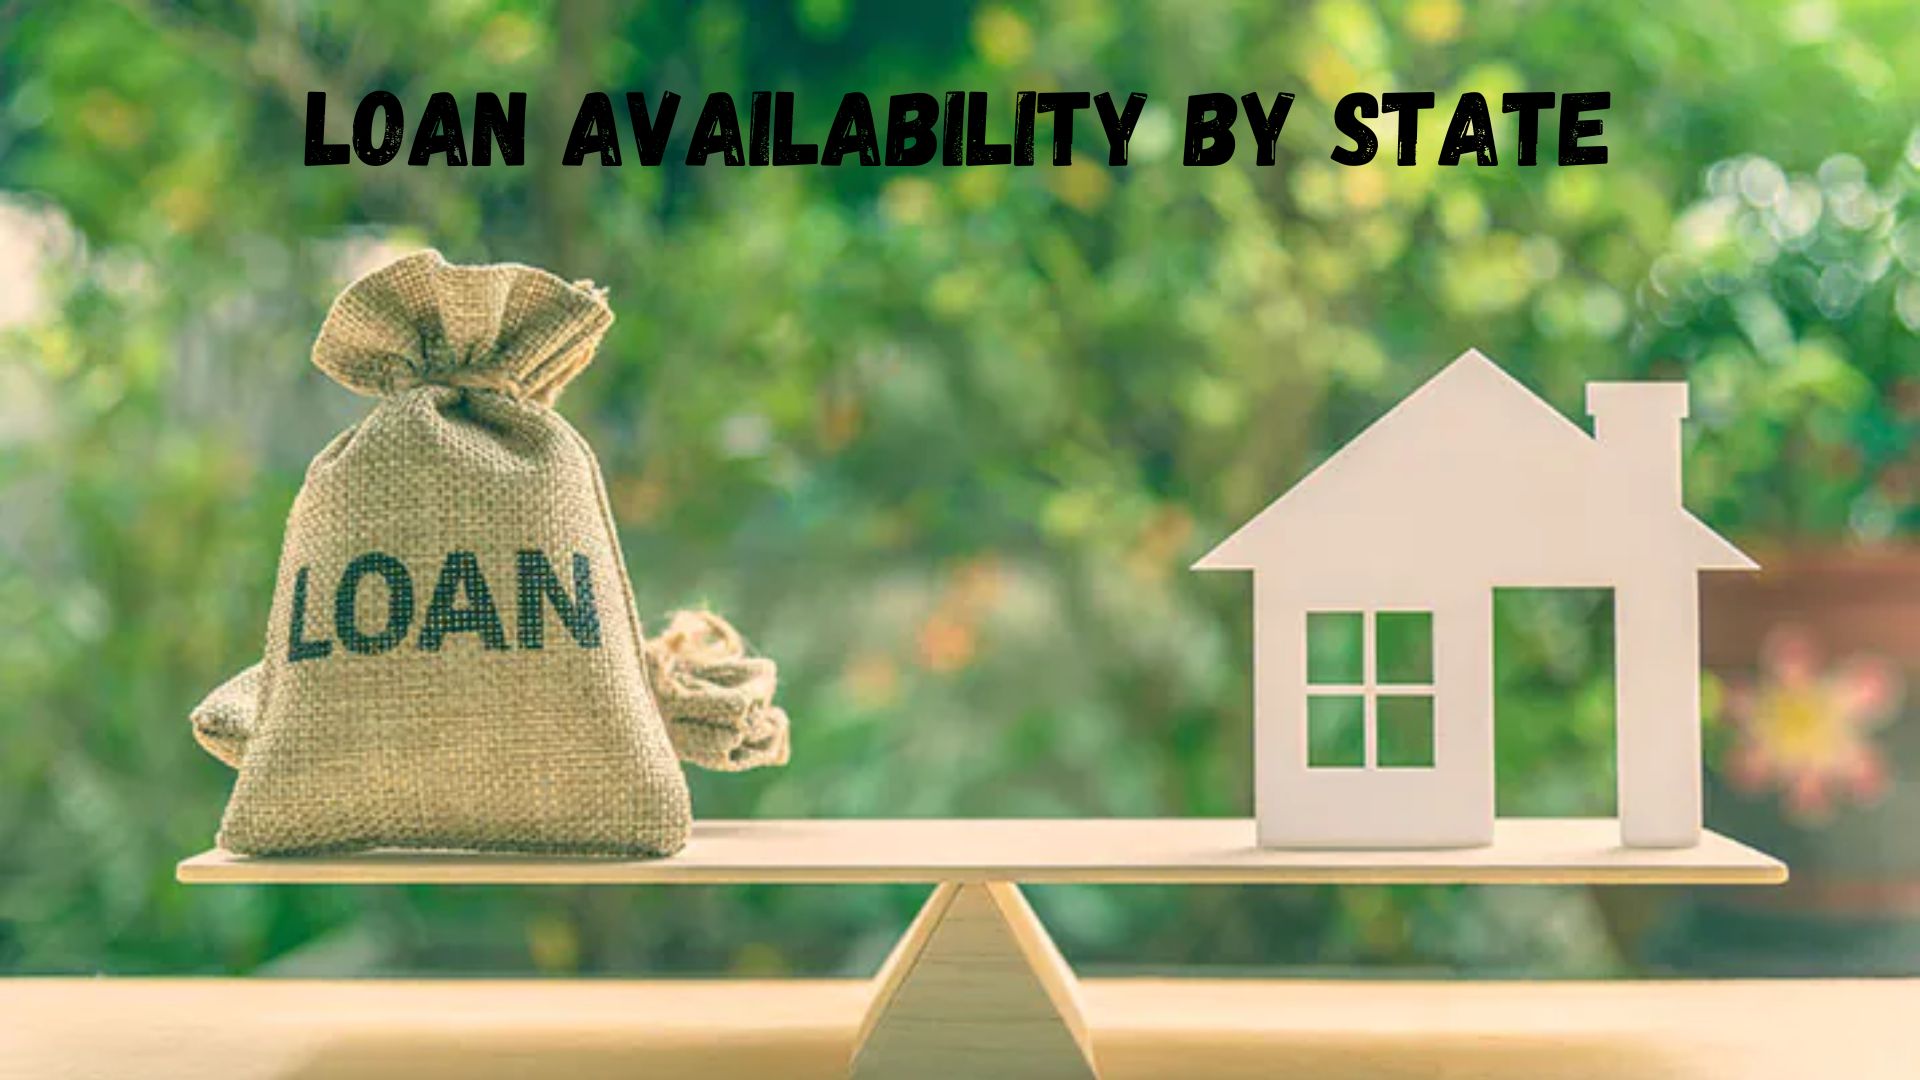 Loan Availability by State.